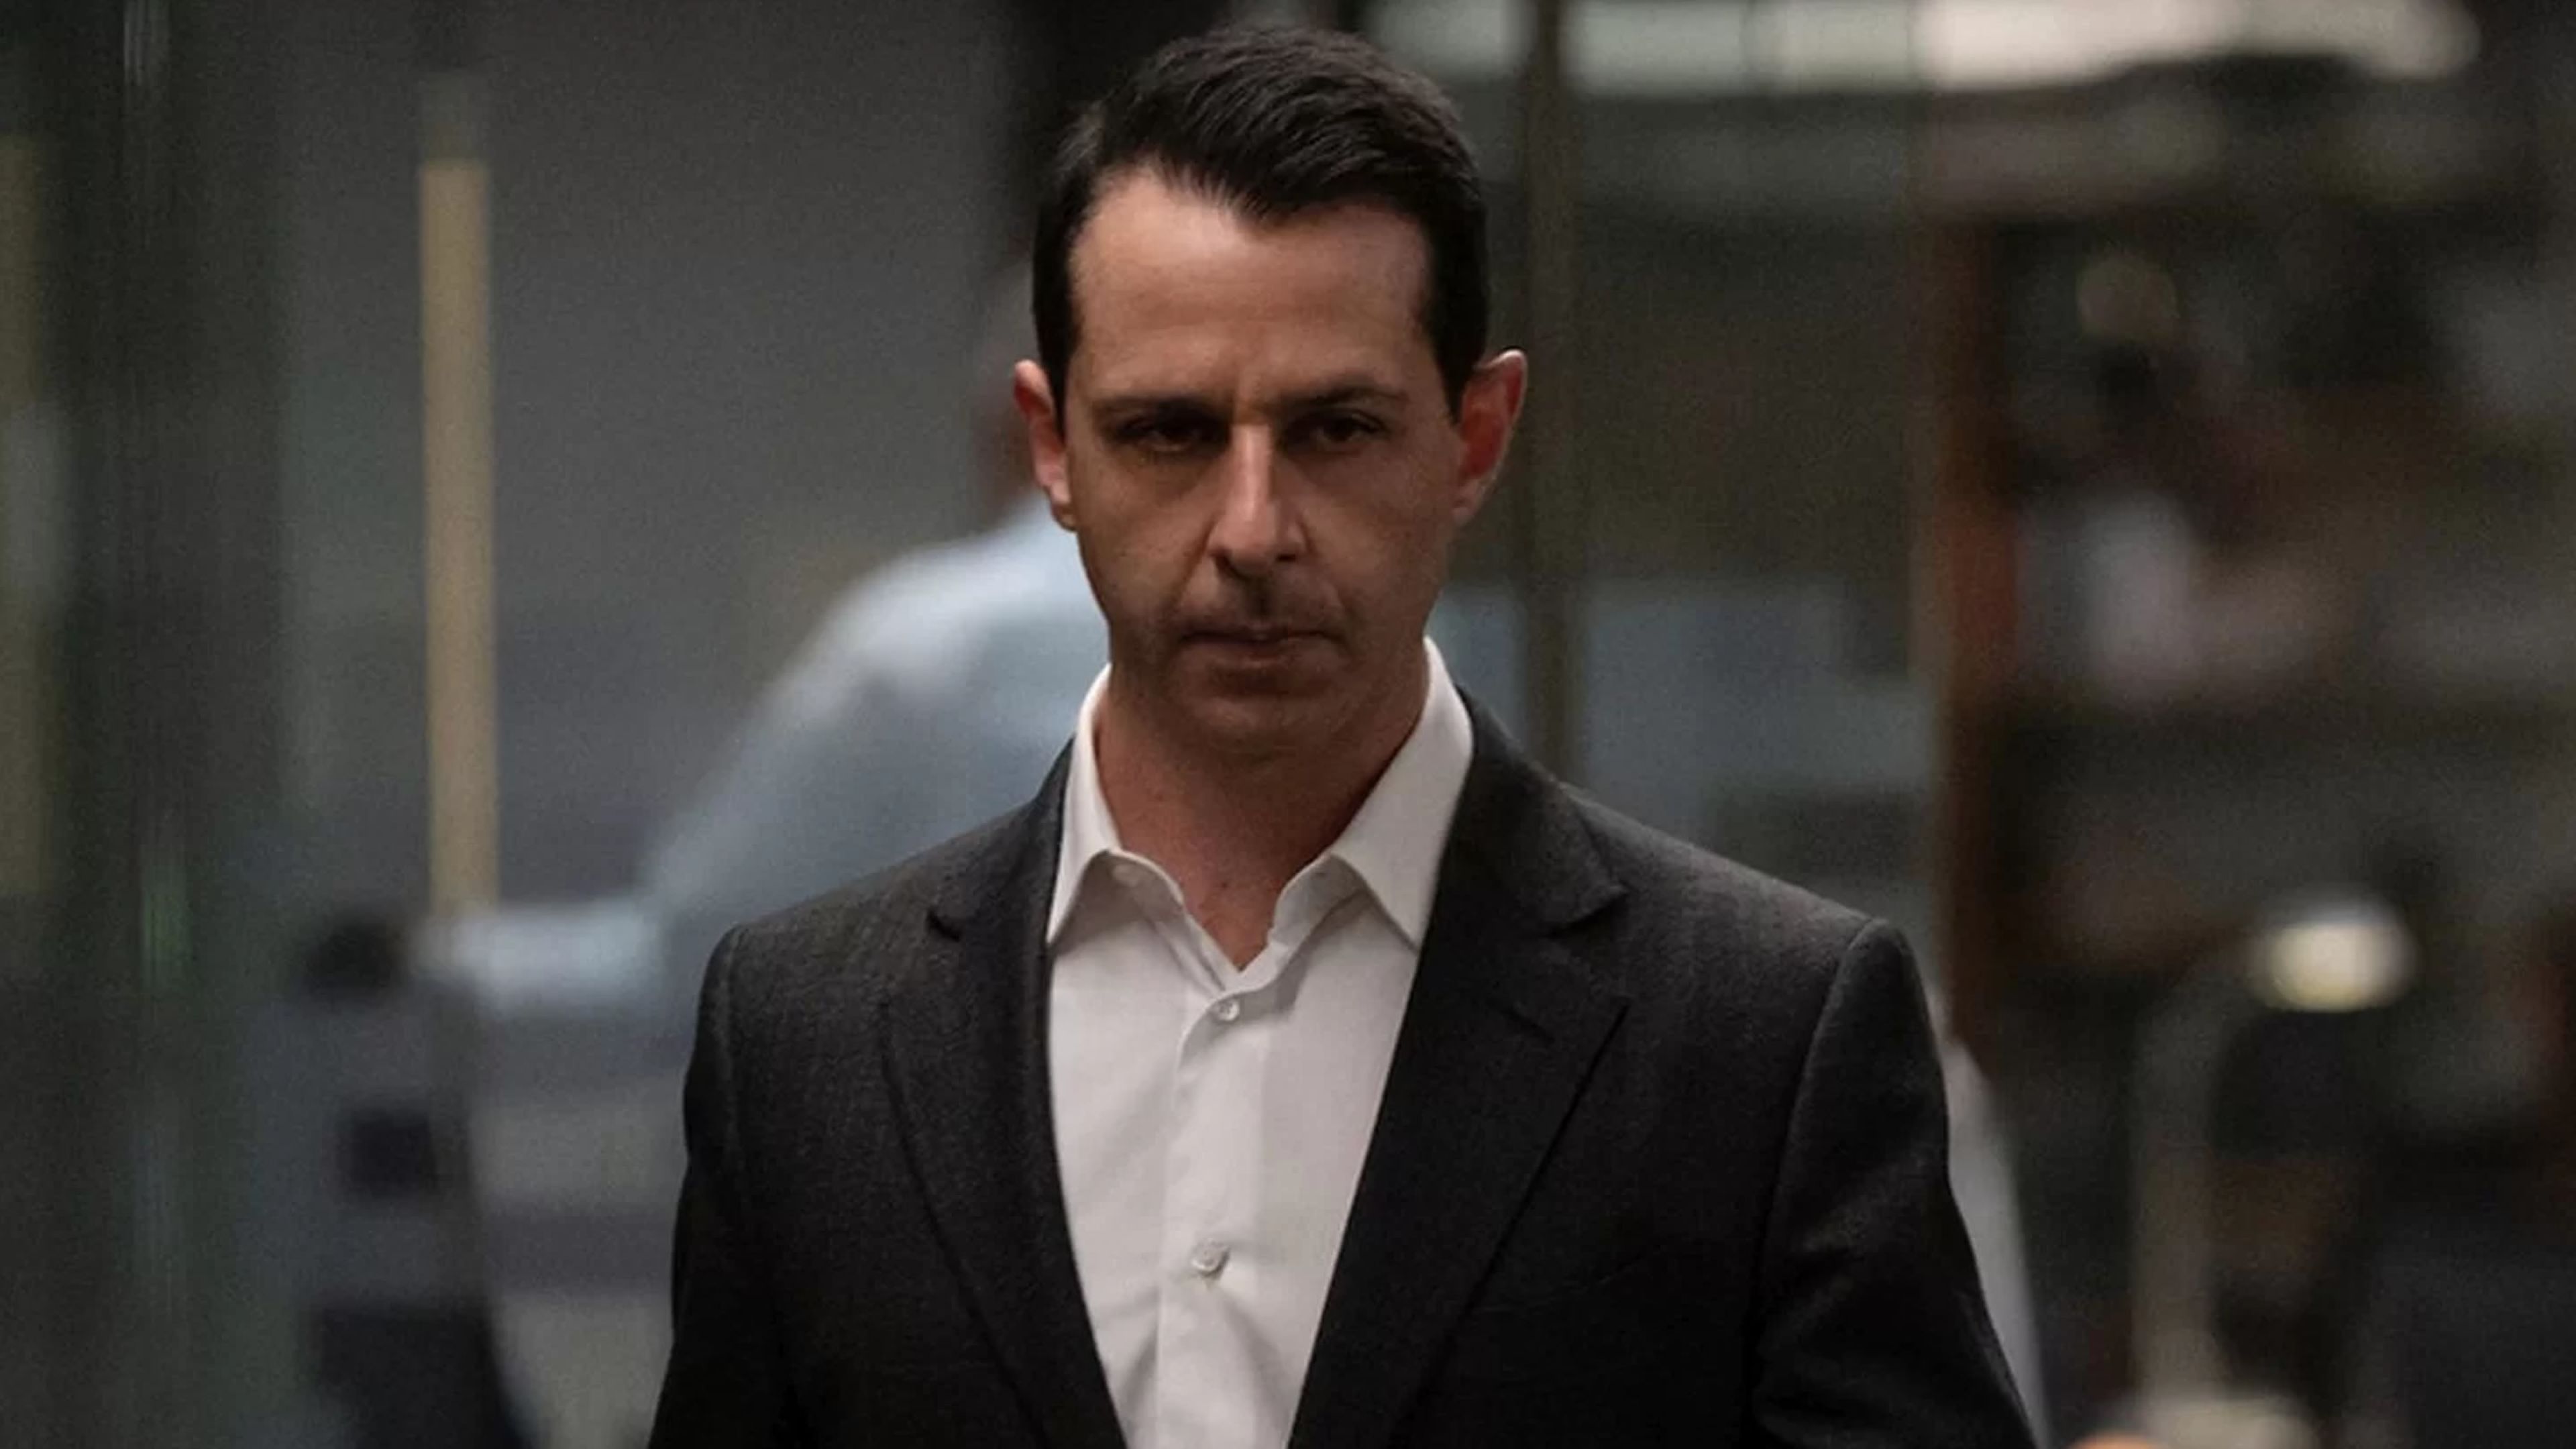 Succession 4x08 - Kendall Roy (Jeremy Strong)